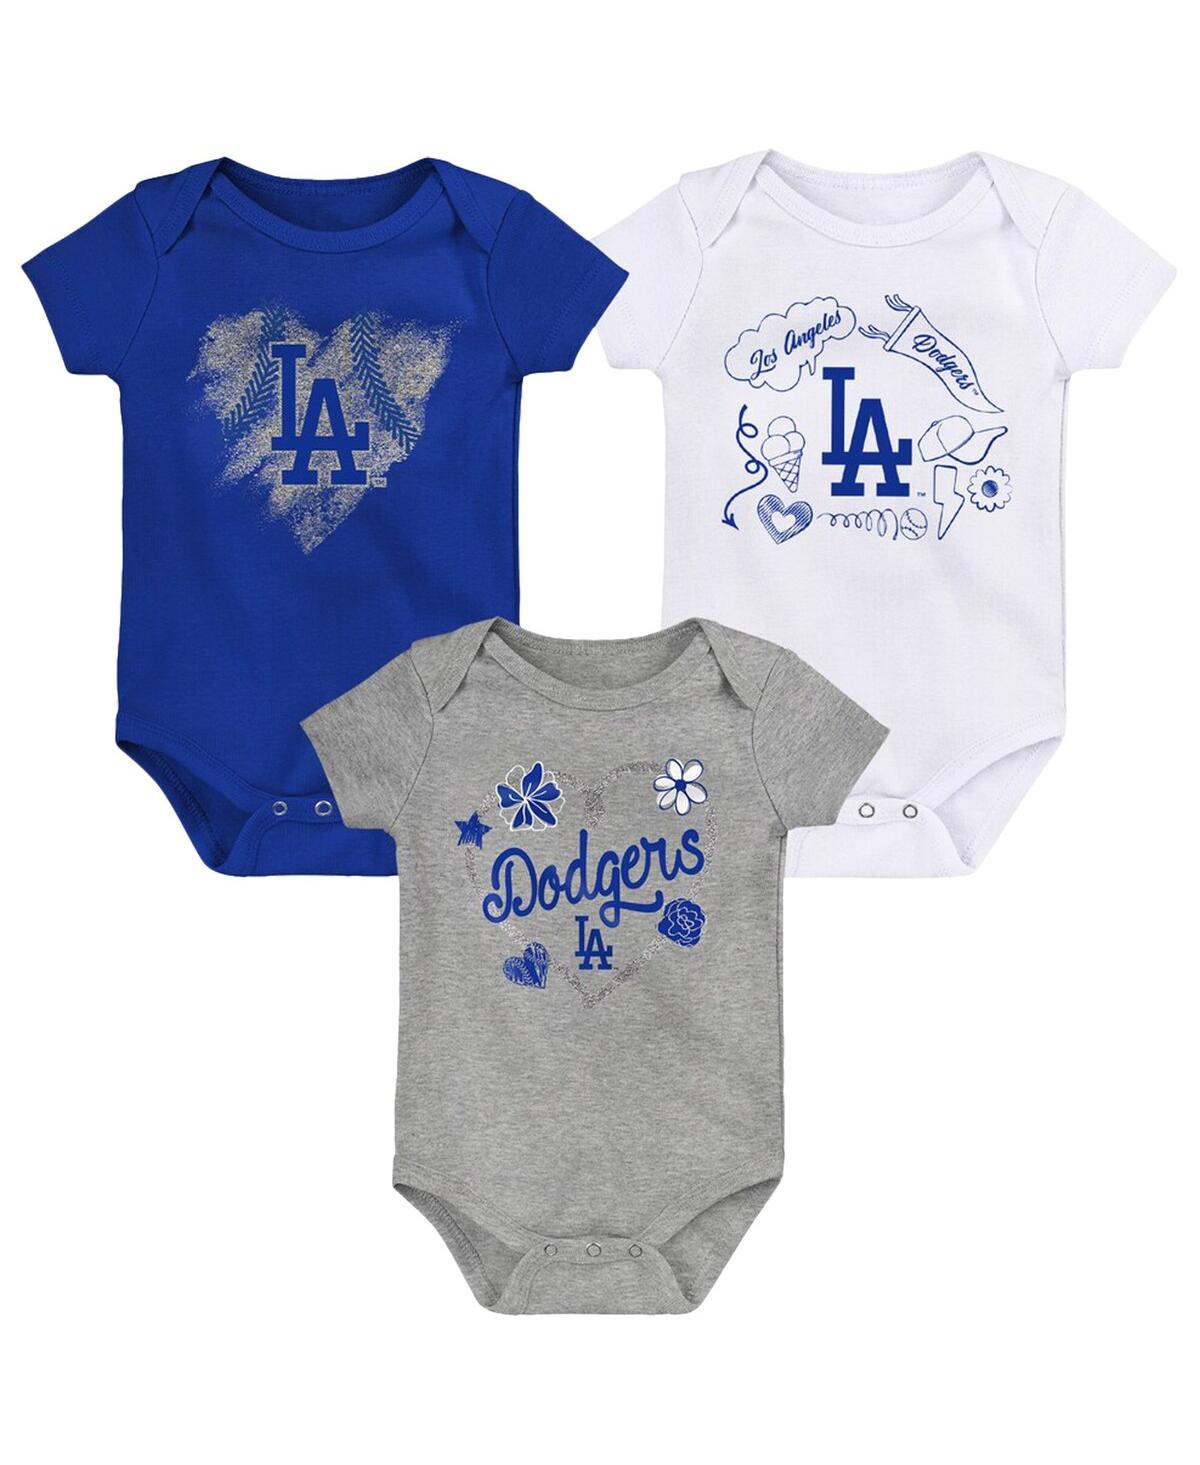 Shop Outerstuff Infant Boys And Girls Royal, White, Heathered Gray Los Angeles Dodgers Batter Up 3-pack Bodysuit Set In Royal,white,heathered Gray